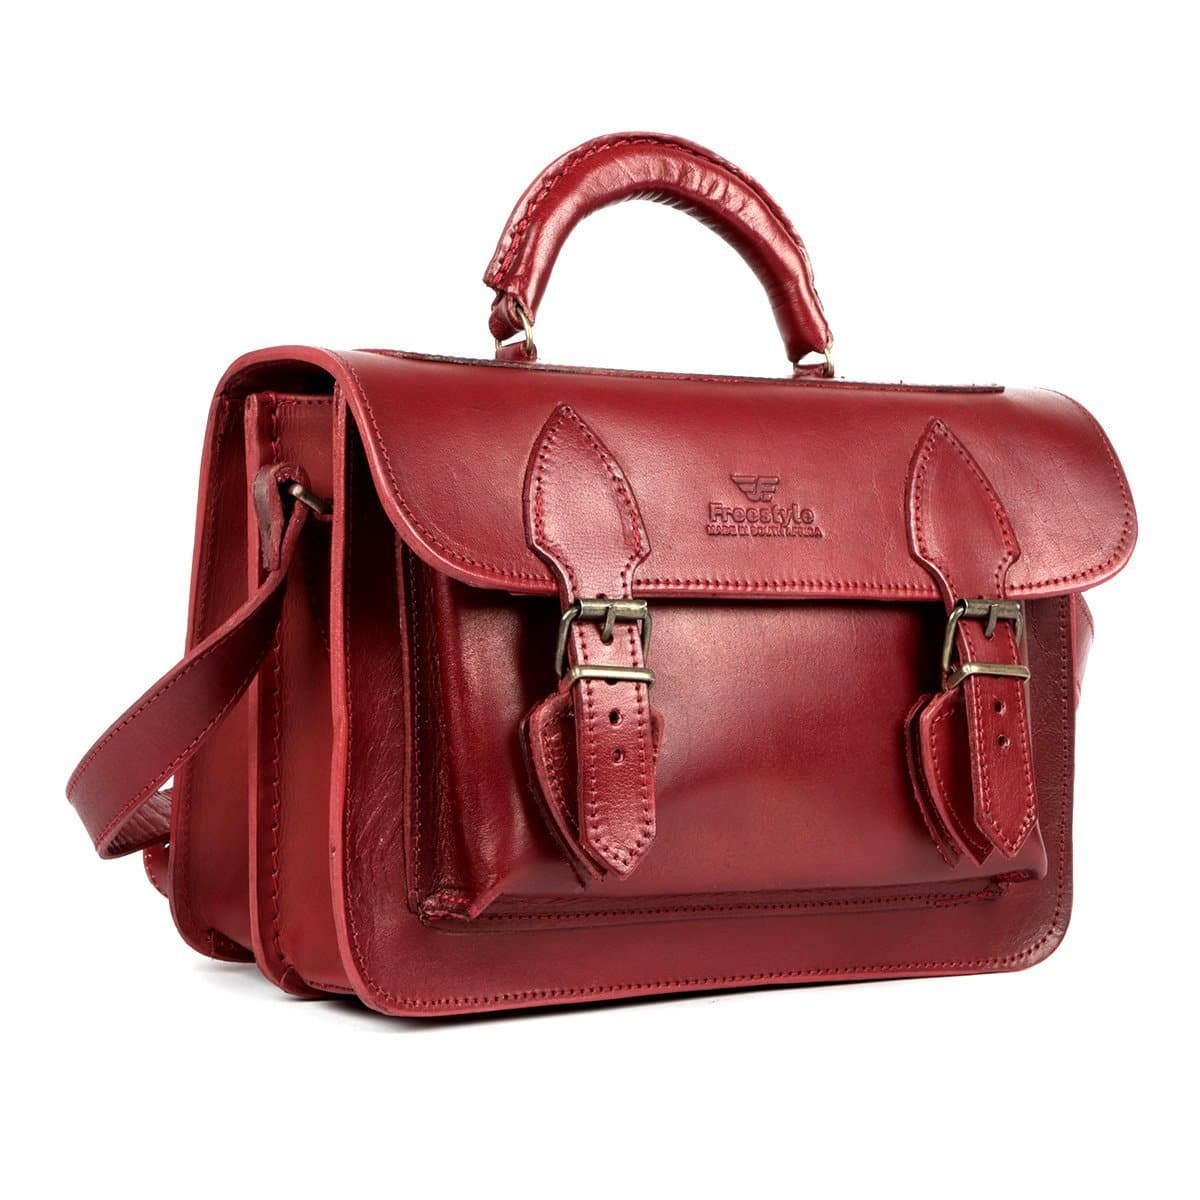 Hand bag Coline for women - soft vegetable tanned leather